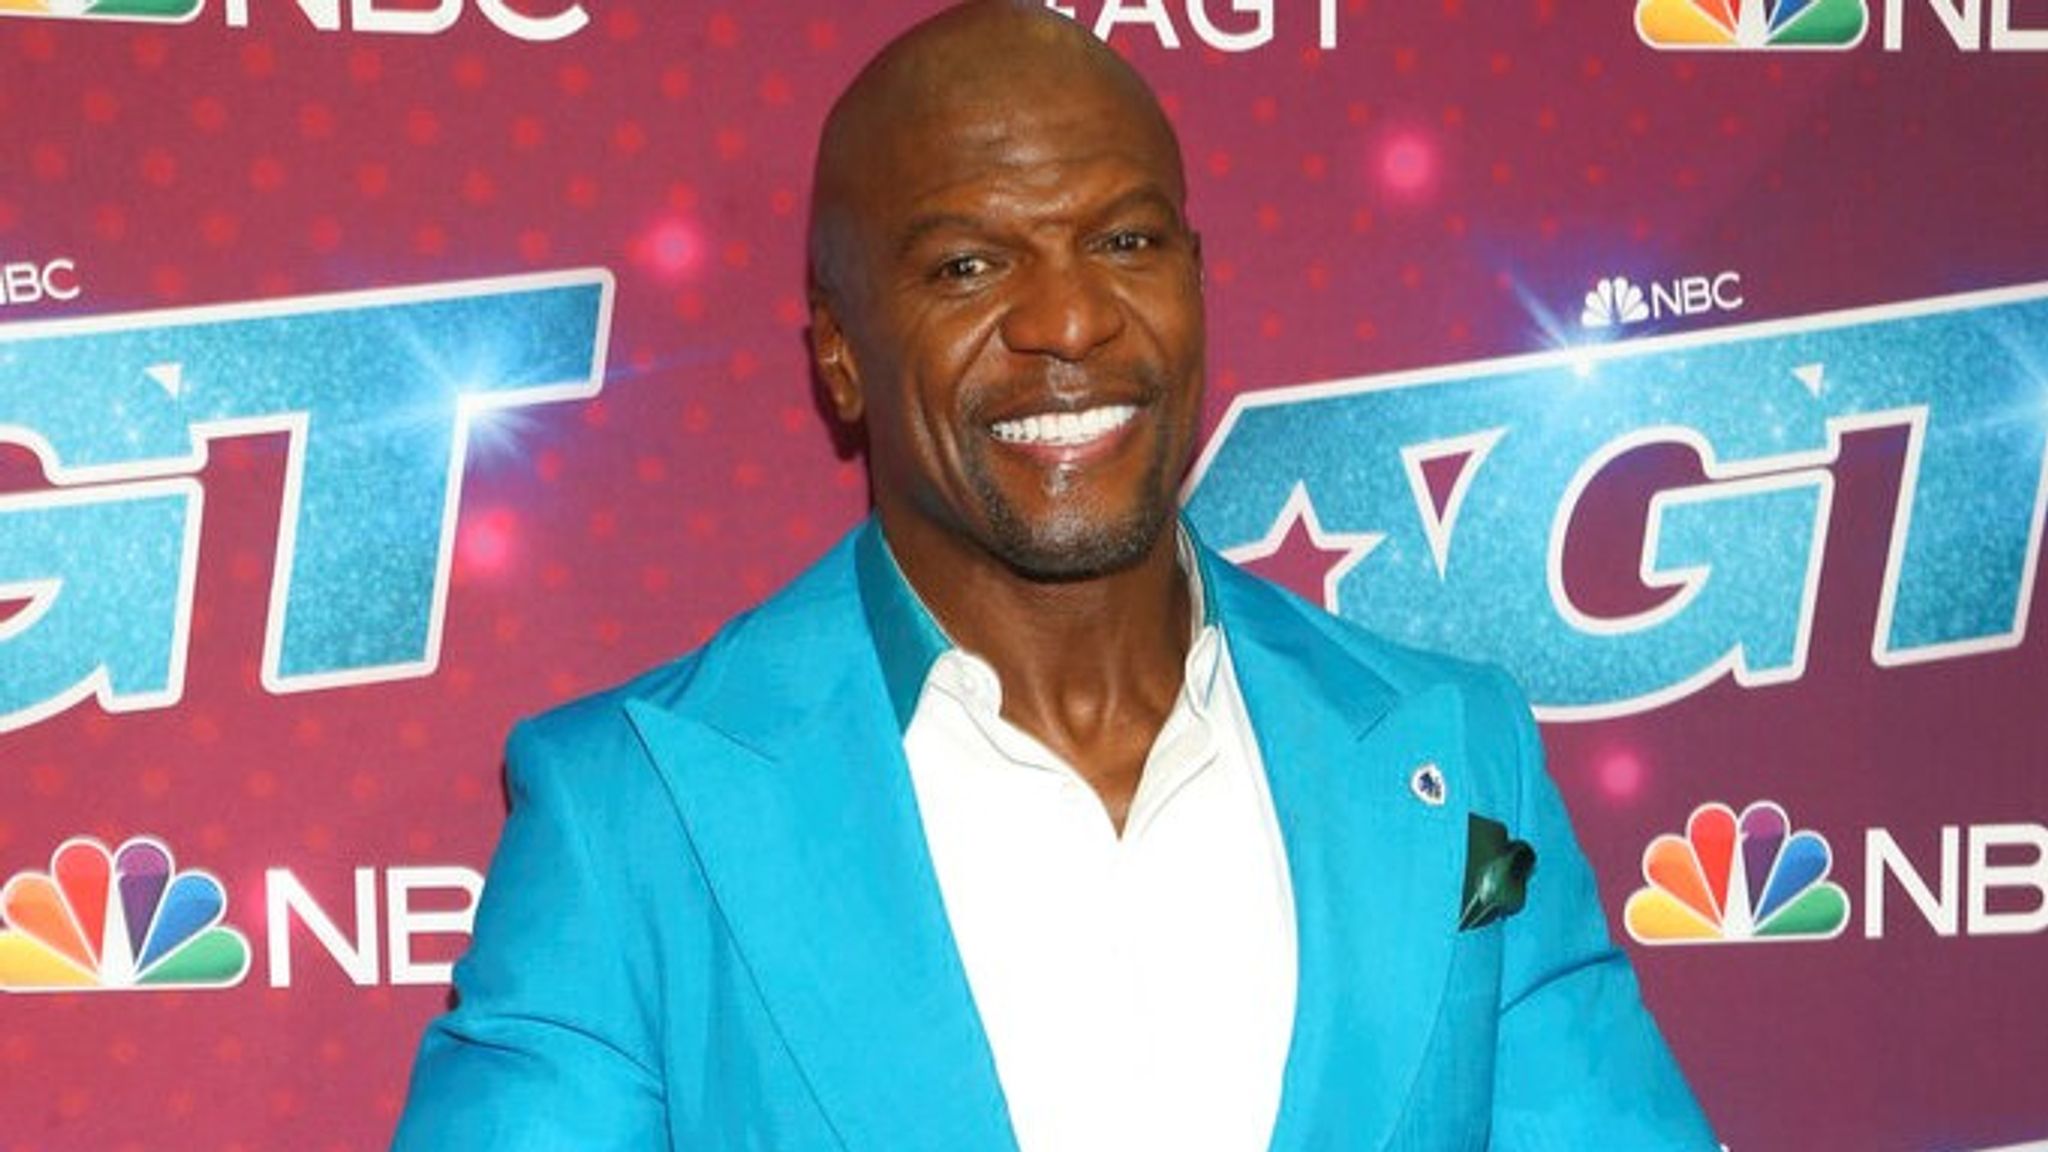 Terry Crews will host the event. 